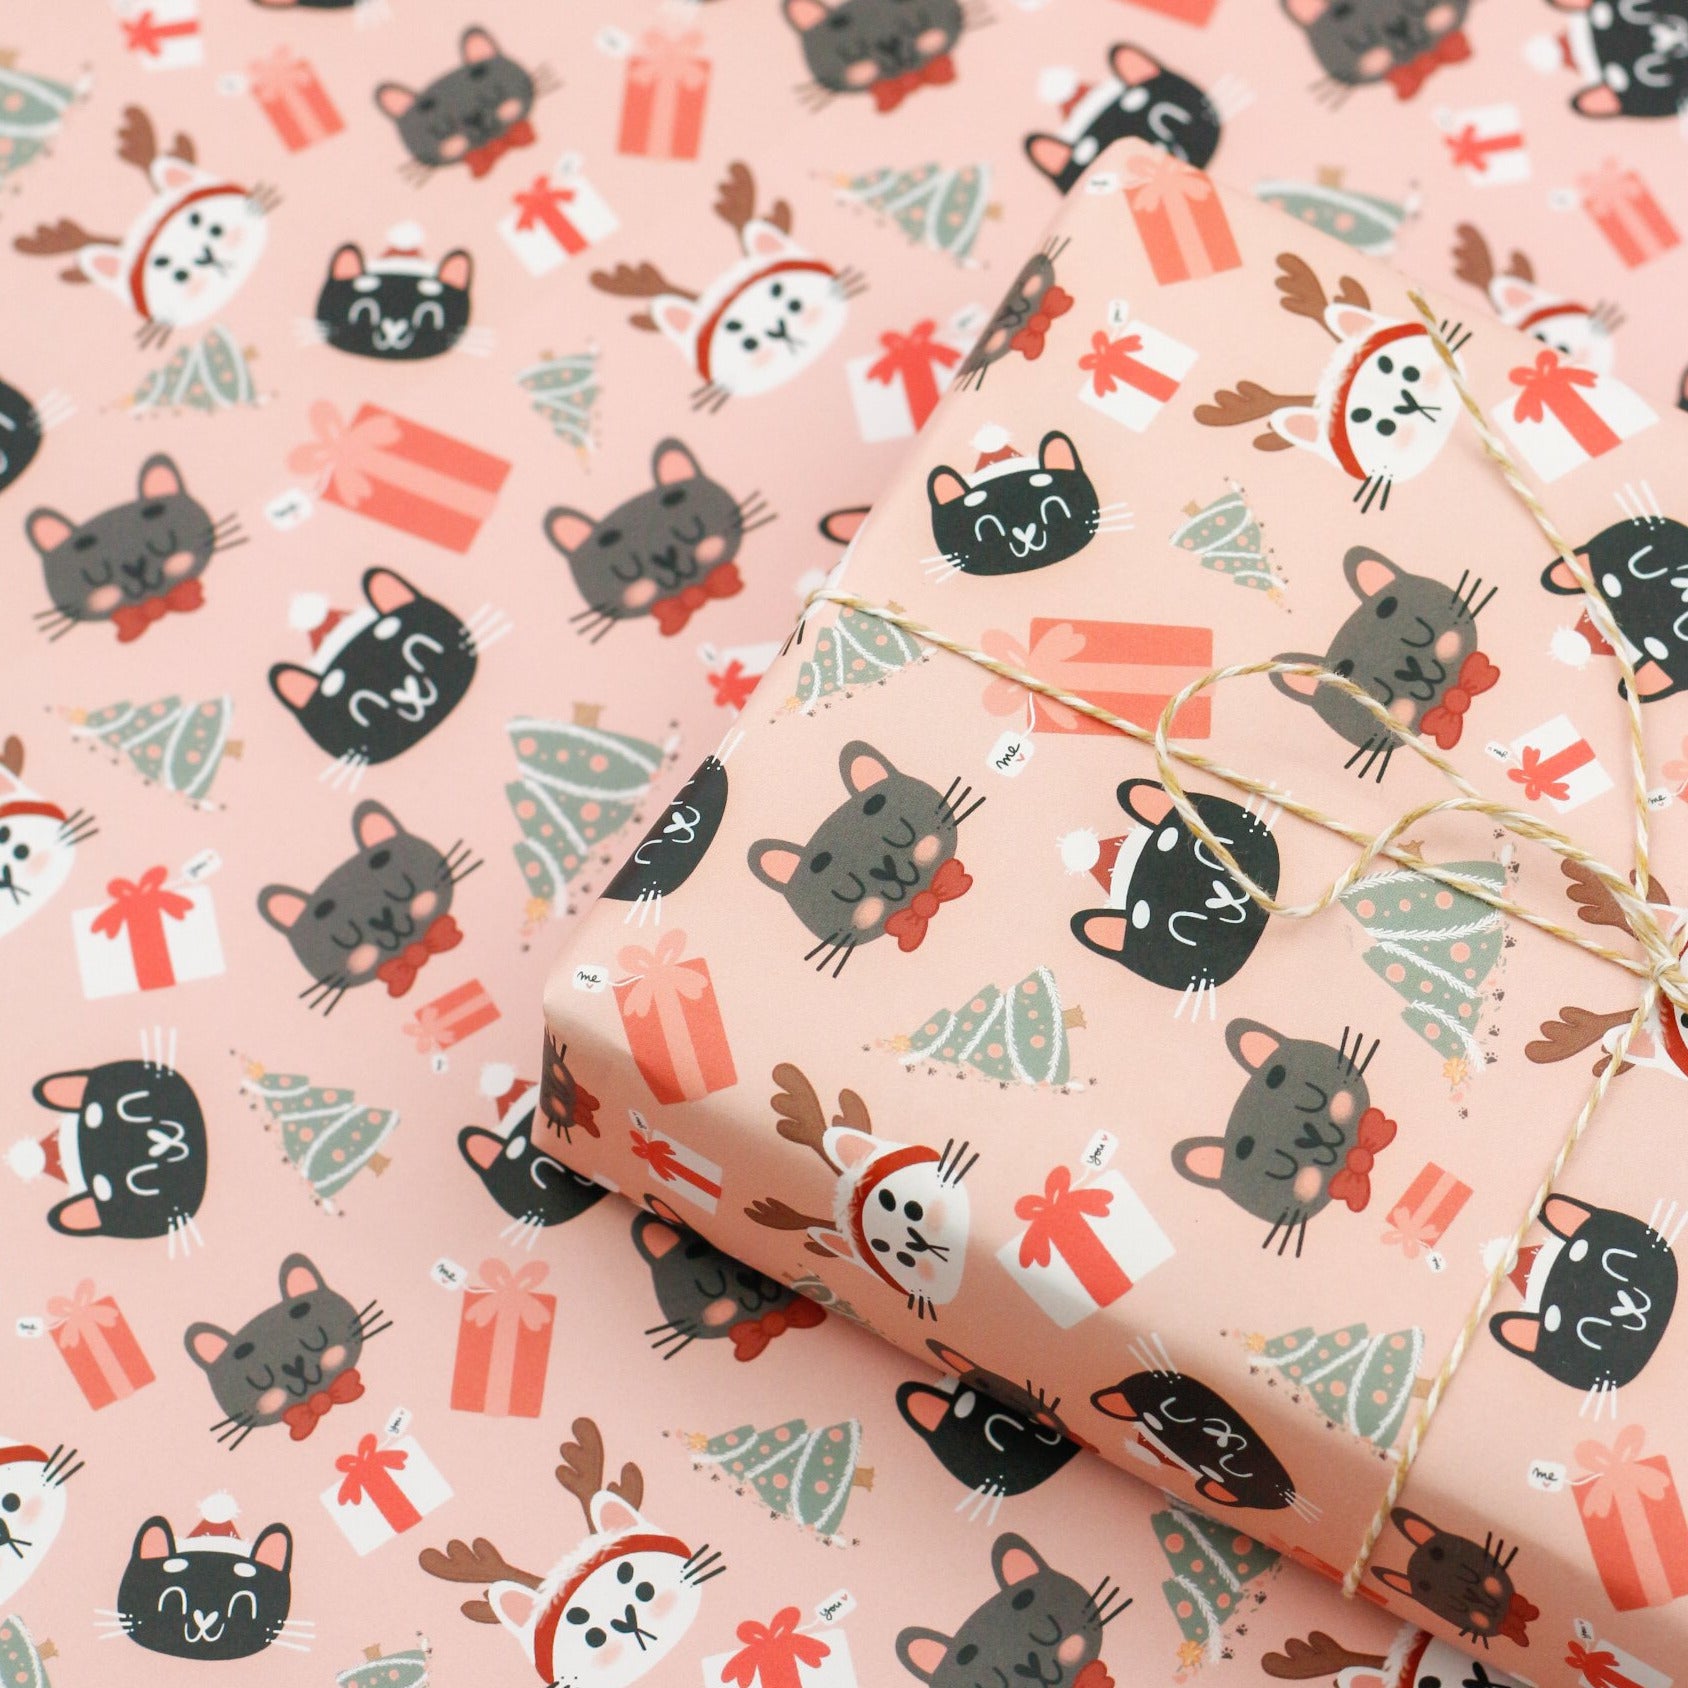 Cat Christmas wrapping - Large wrapping paper sheets - Cat faces